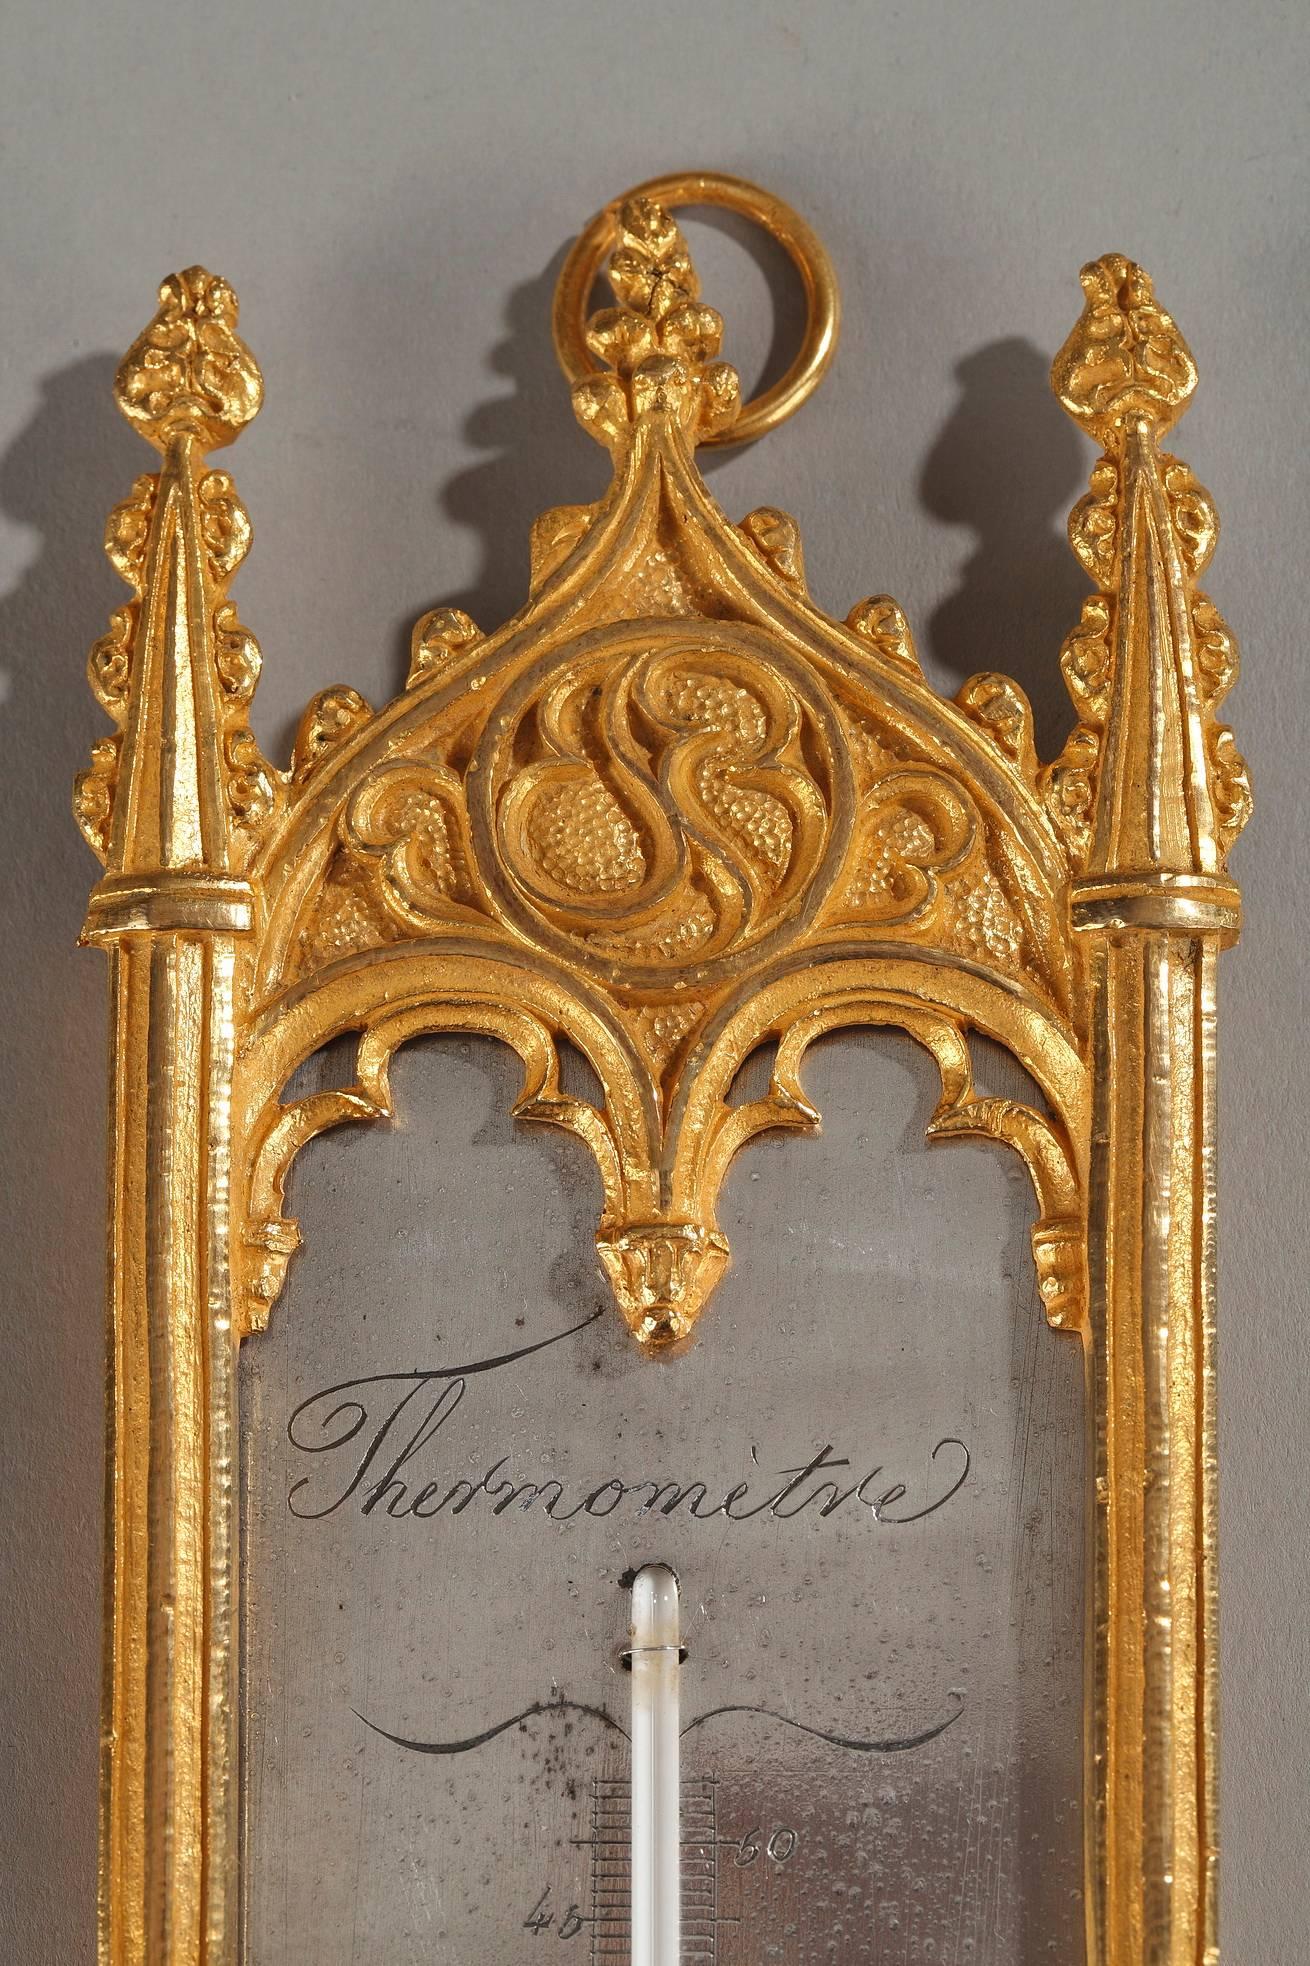 Early 19th century Romantic-period thermometer and semainier crafted in ormolu or gilt bronze. The semainier is a calendar that tracks the days of the week. Both thermometer and semainier are in Neo-Gothic style, embellished with rosette, arches,